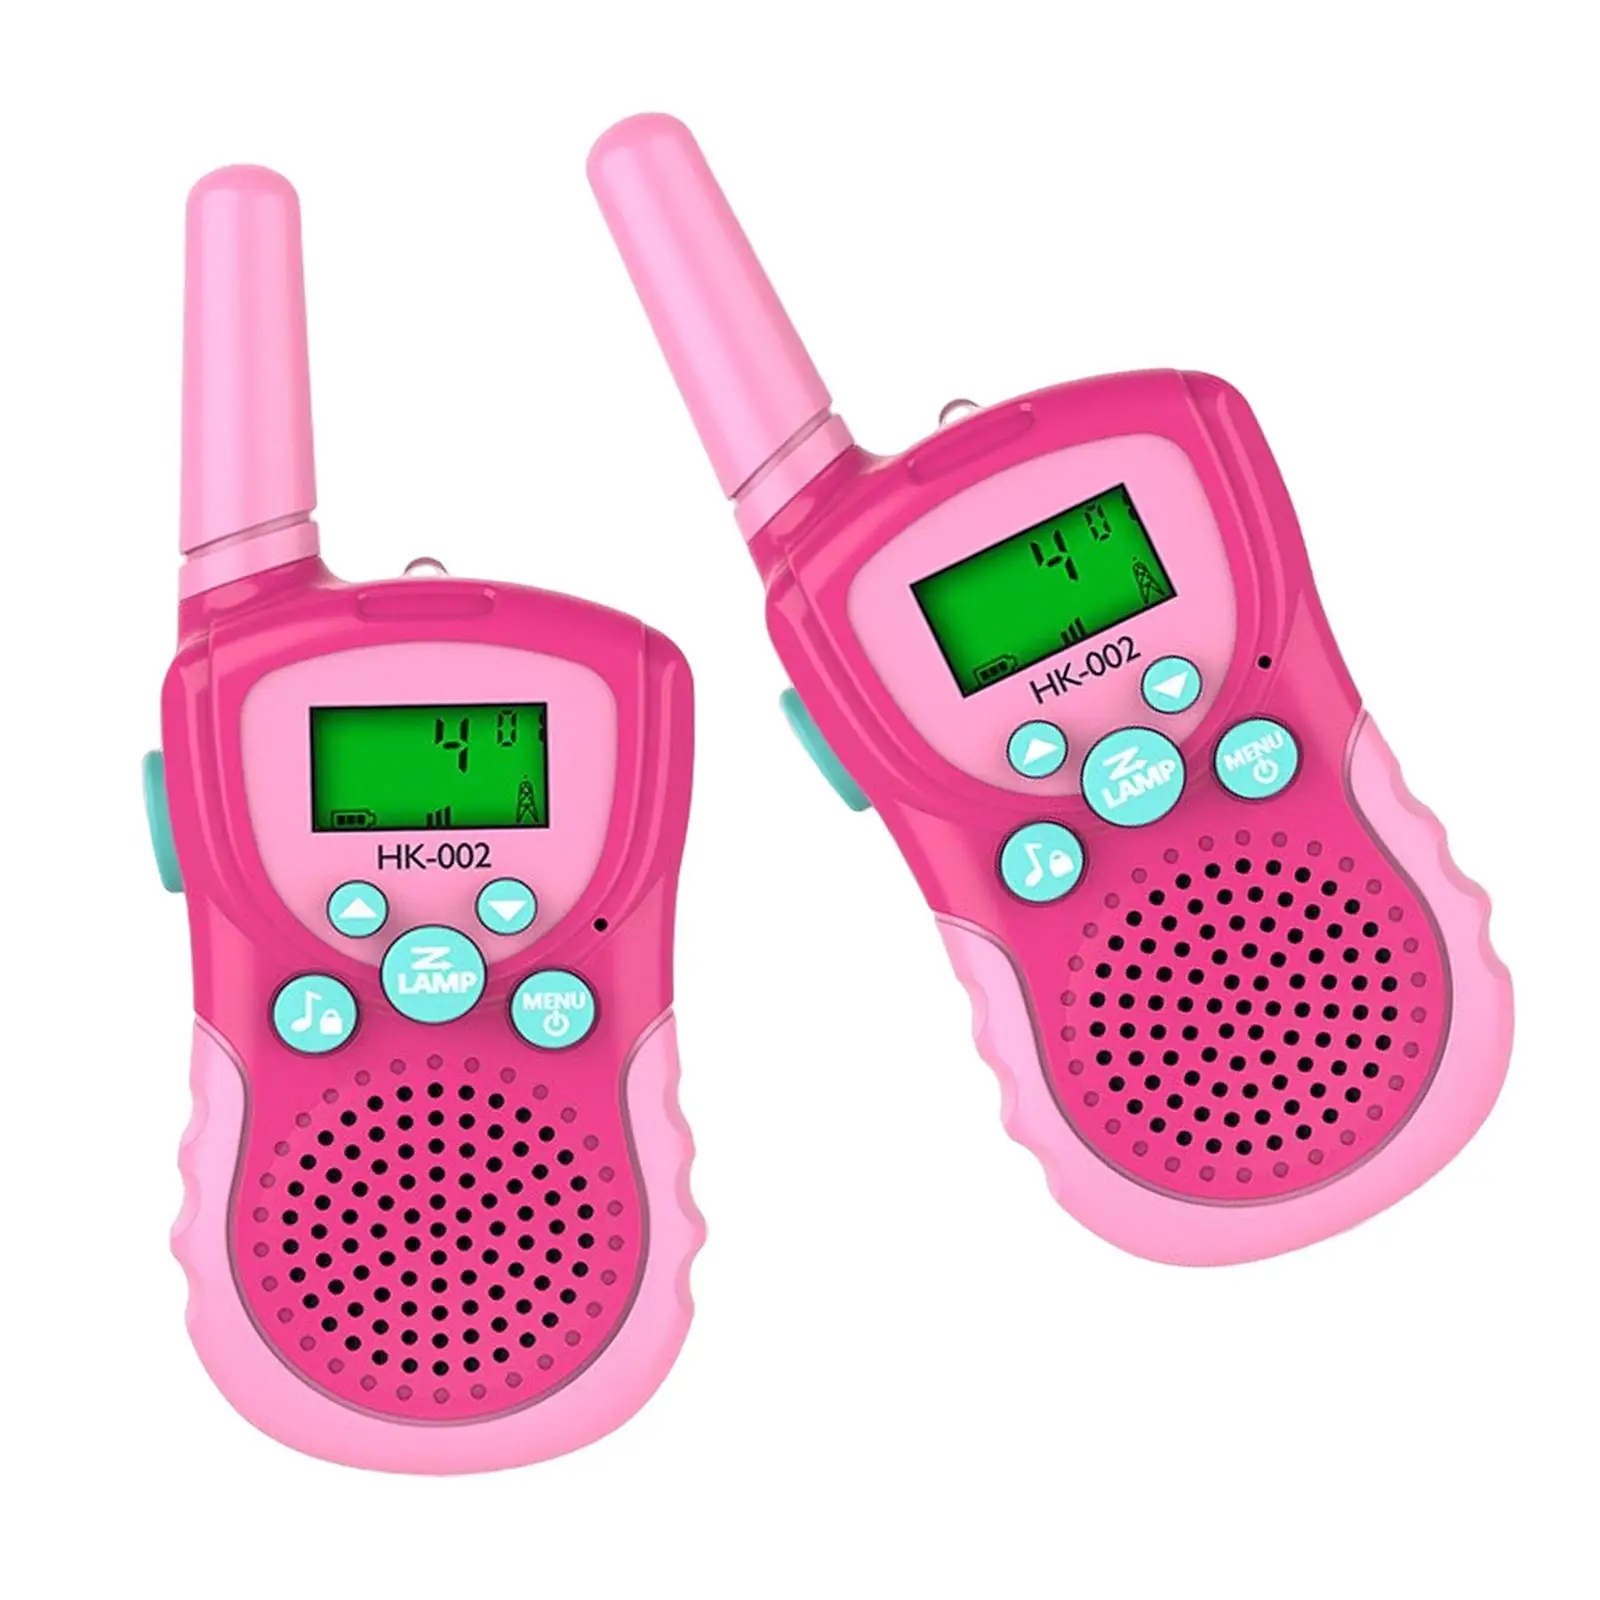 2Pcs Walkie Talkies for Kids Easy to Use Long Distance 2km 2 Way Radio Toys for 3-14 Years Old Camping Hiking Indoor Boys Girls